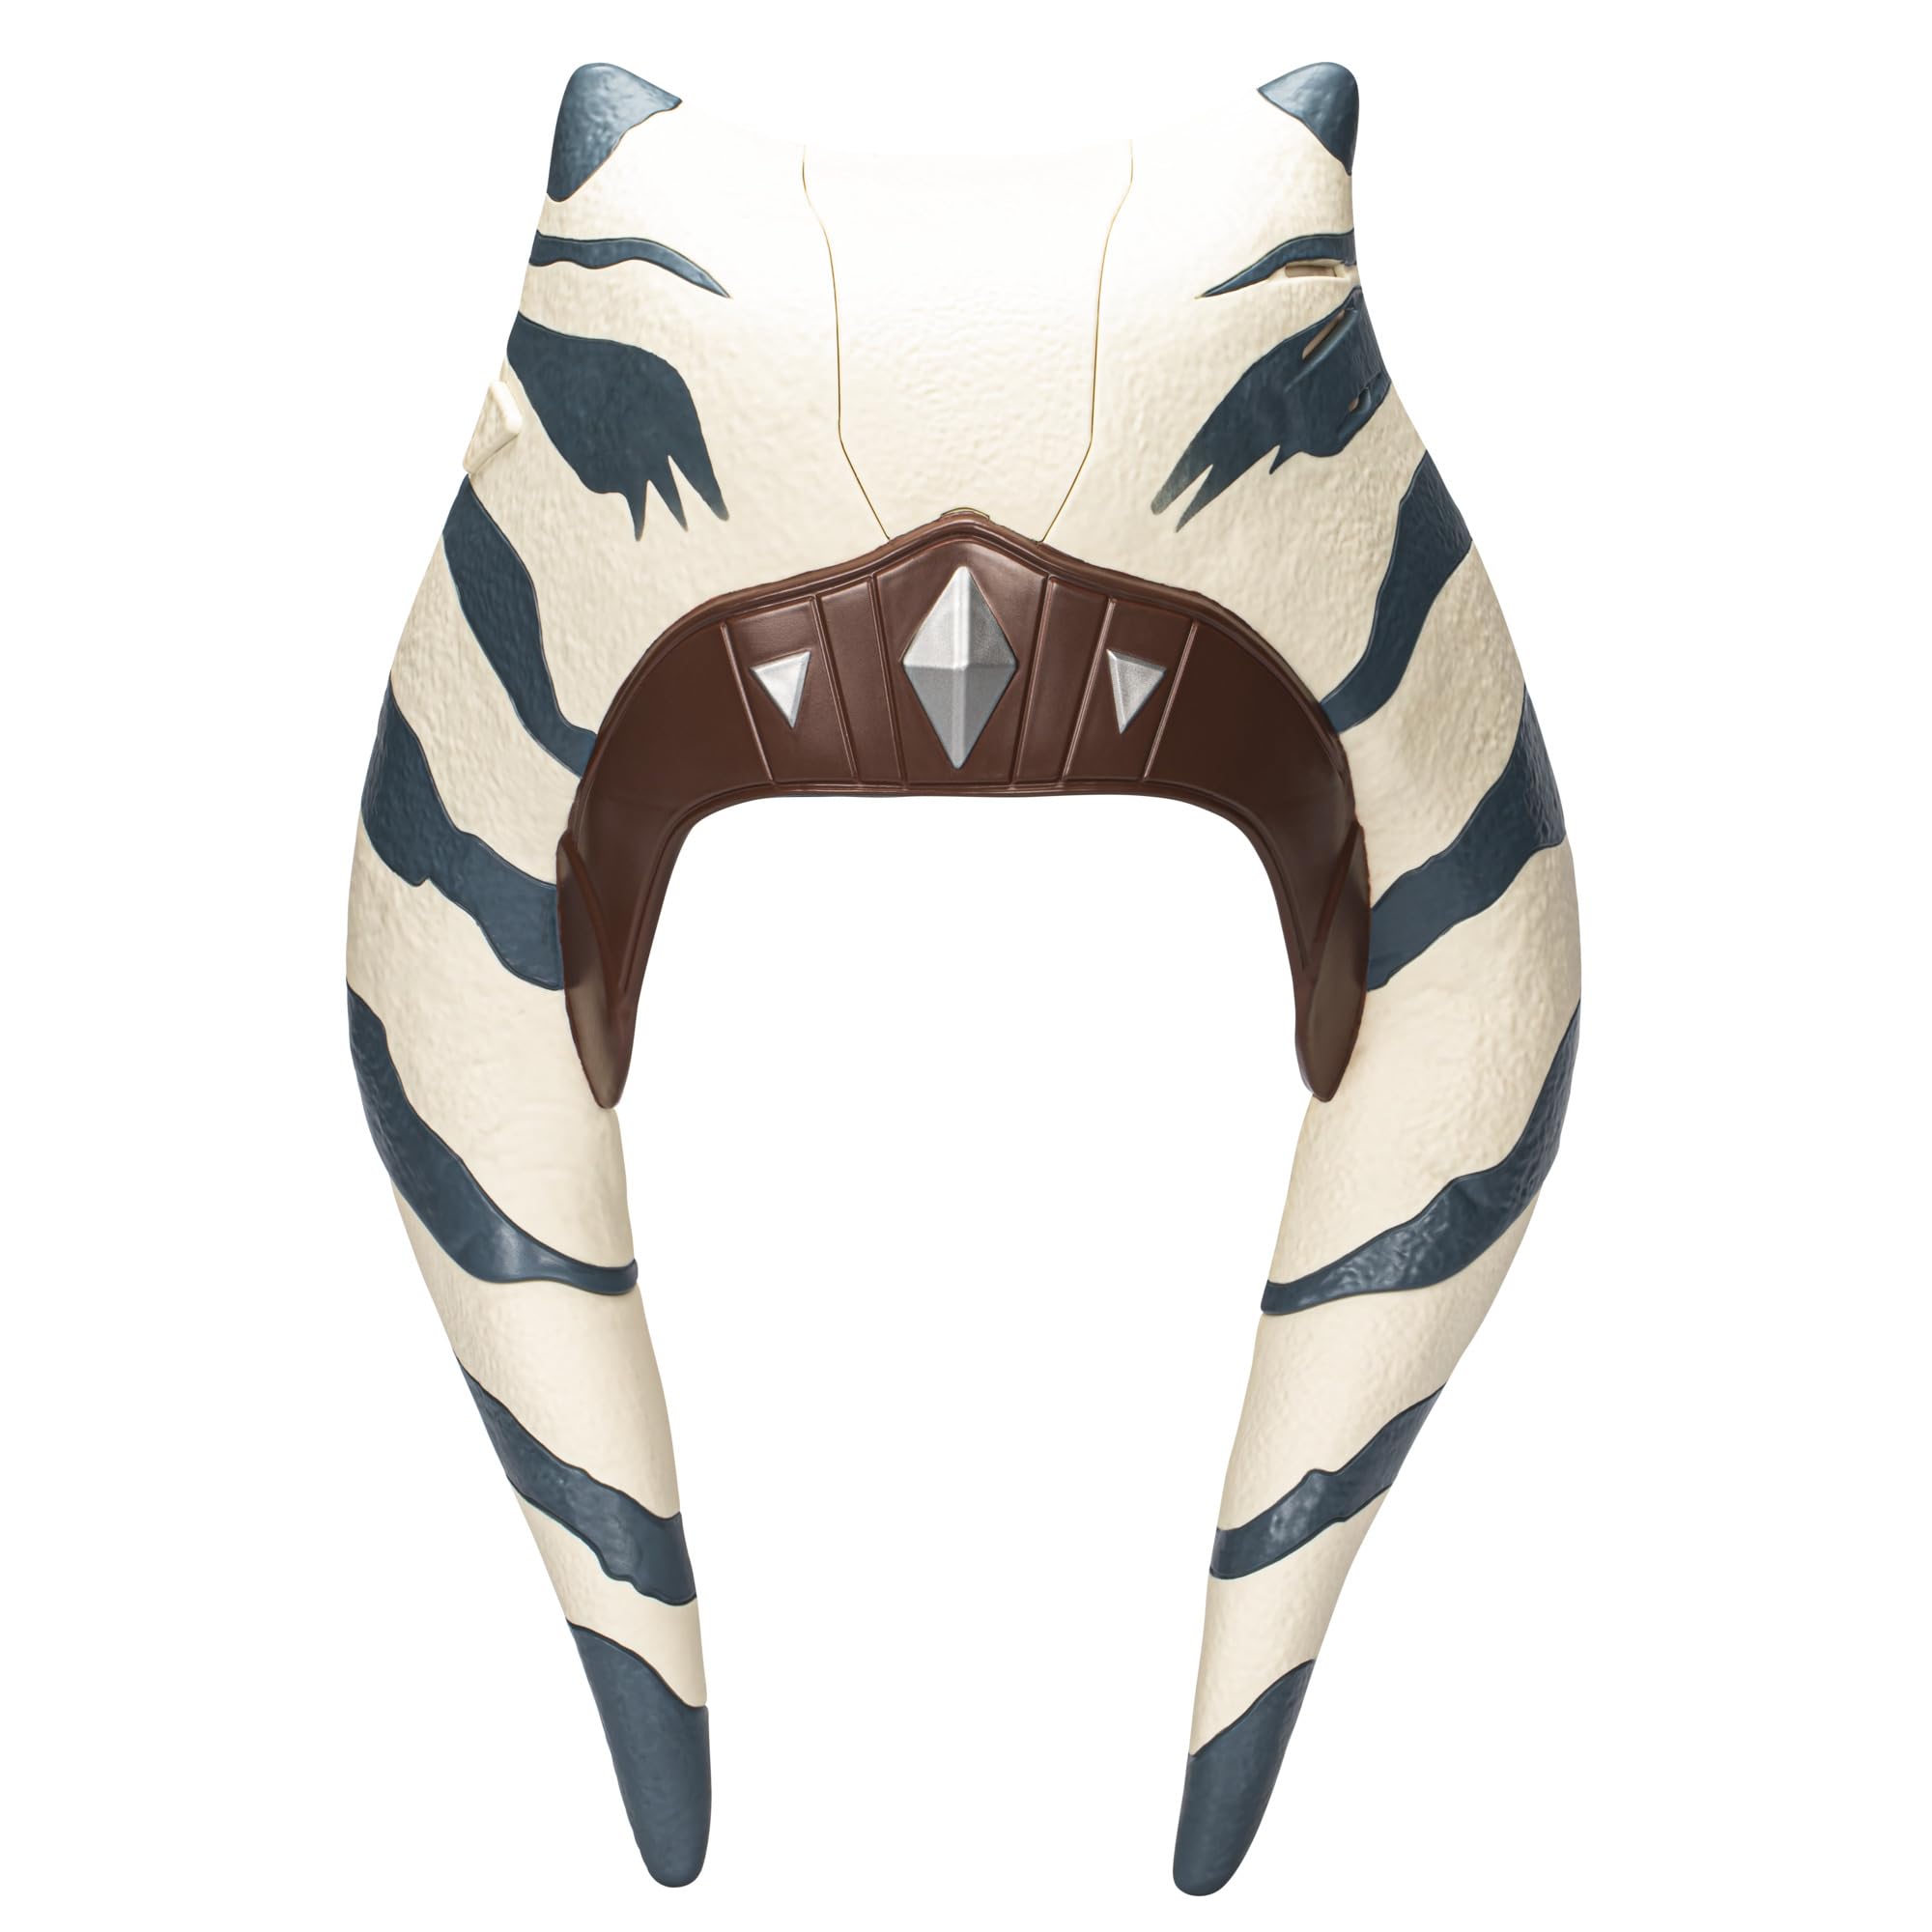 Star Wars Ahsoka Tano Electronic Mask w/ Phrases & Sound Effects $9.50 + Free Shipping w/ Prime or on orders $35+